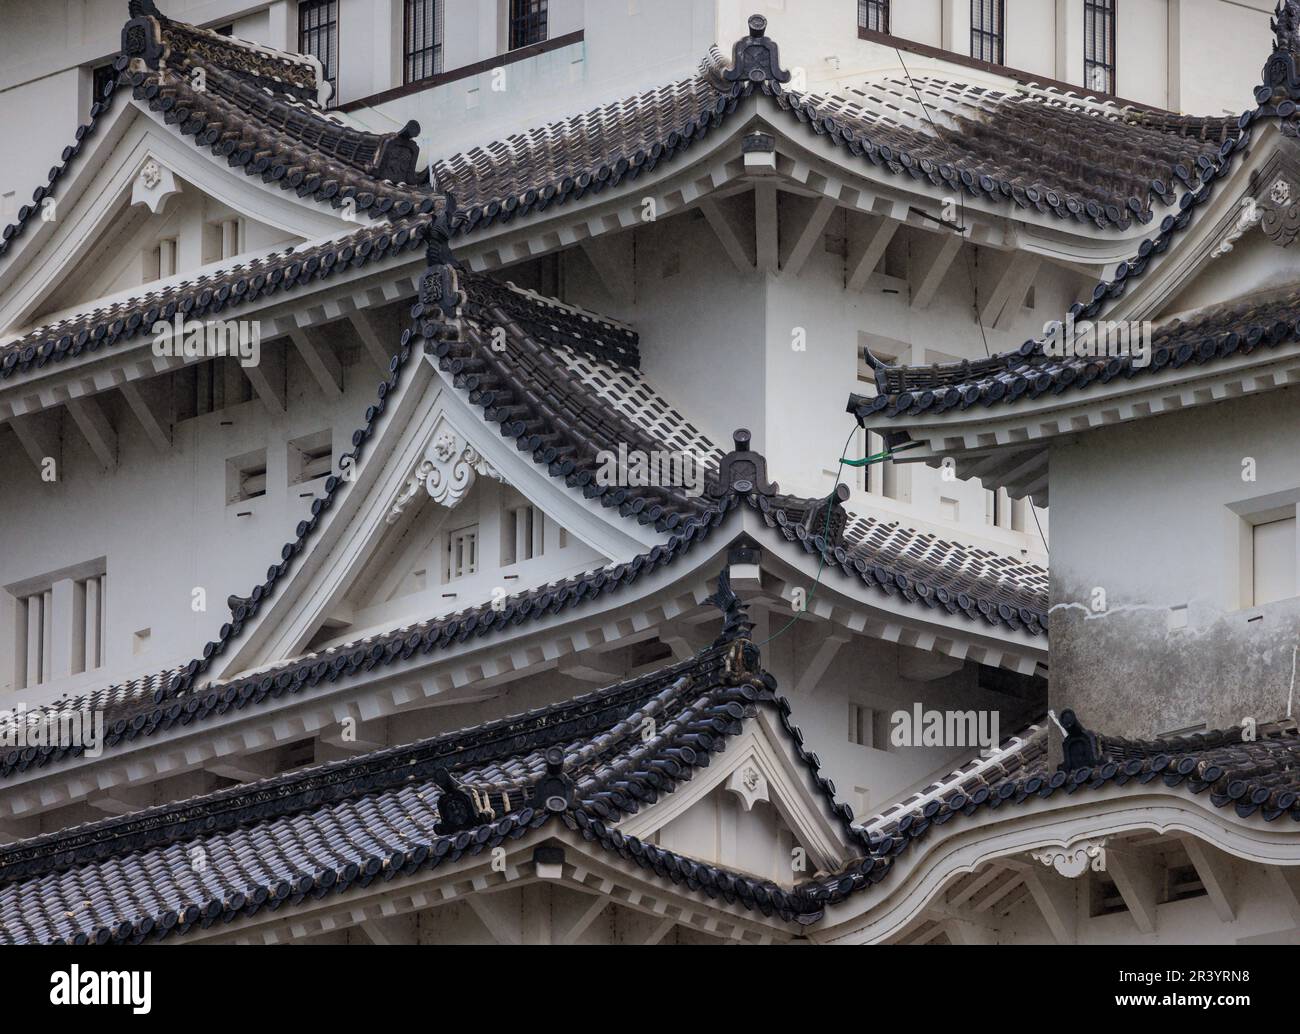 Closeup view of tiles and pitched roof on historic Japanese castle Stock Photo